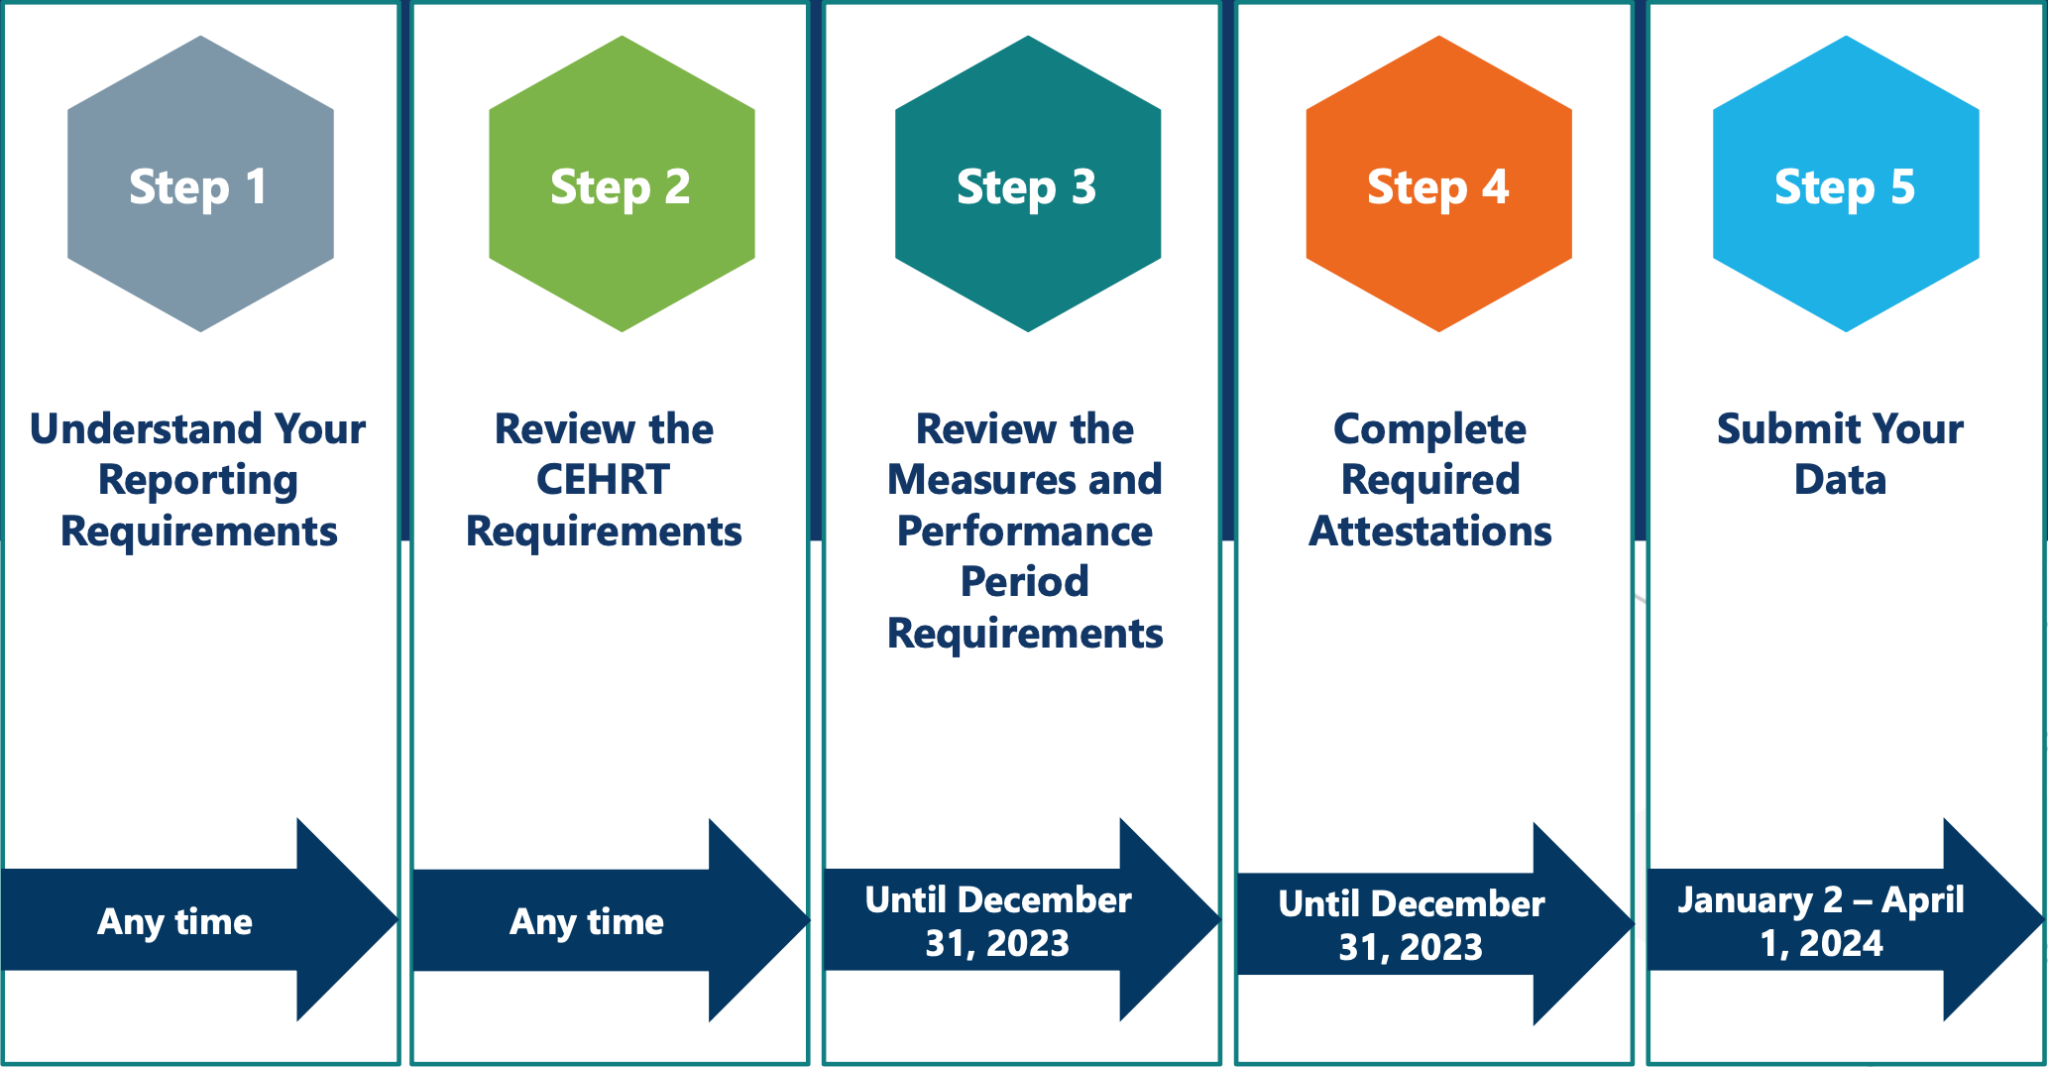 Get Started with Promoting Interoperability in 5 Steps HCIS